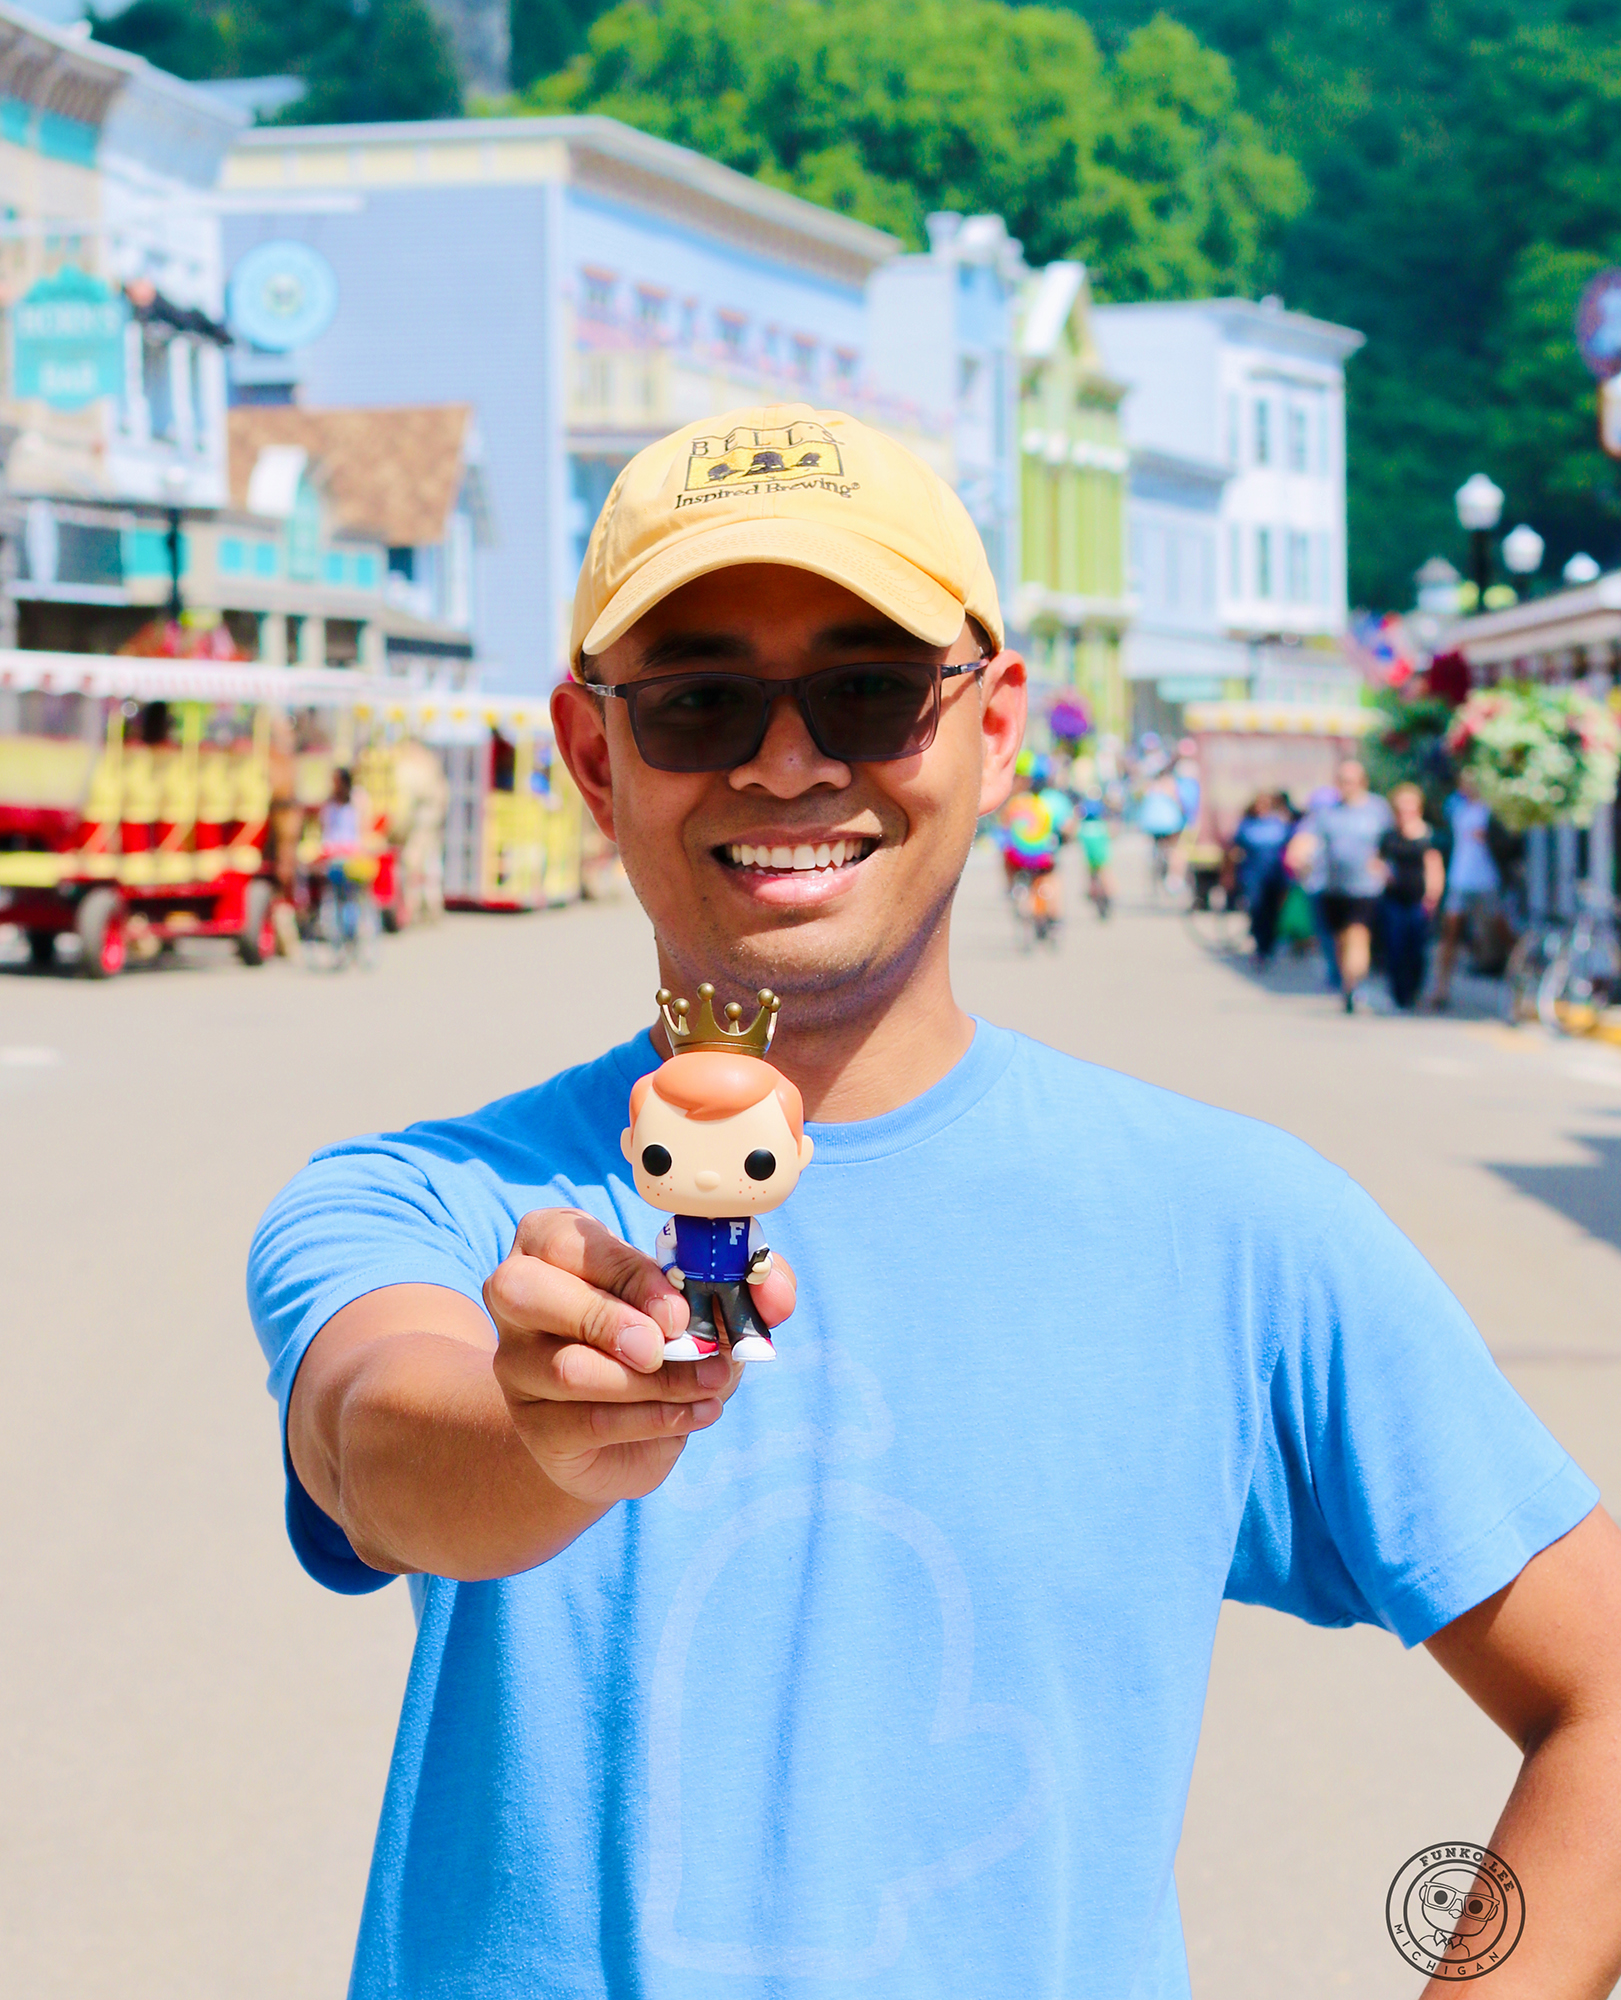 Lee with Freddy Funko Collectible